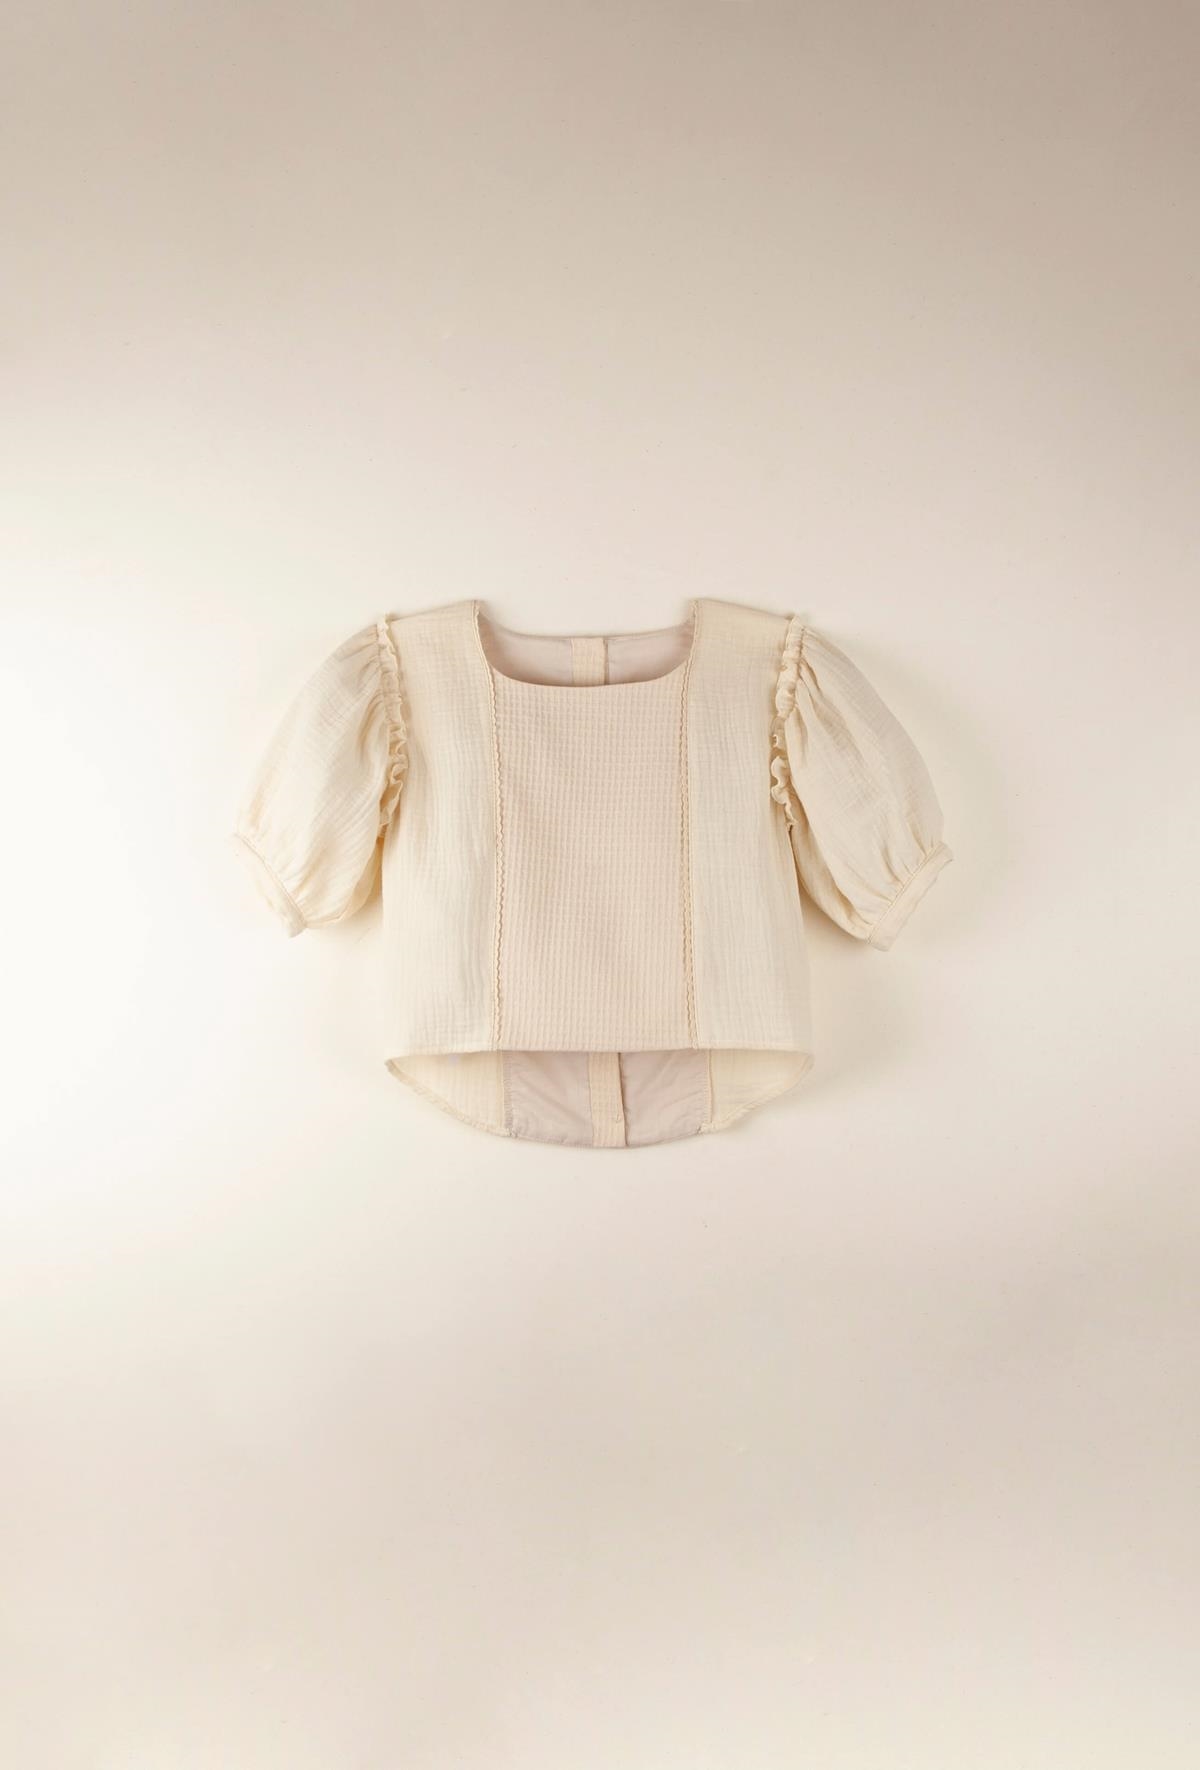 Mod.18.1 Off white organic blouse with puffed sleeve | SS22 Mod.18.1 Off white organic blouse with puffed sleeve | 1